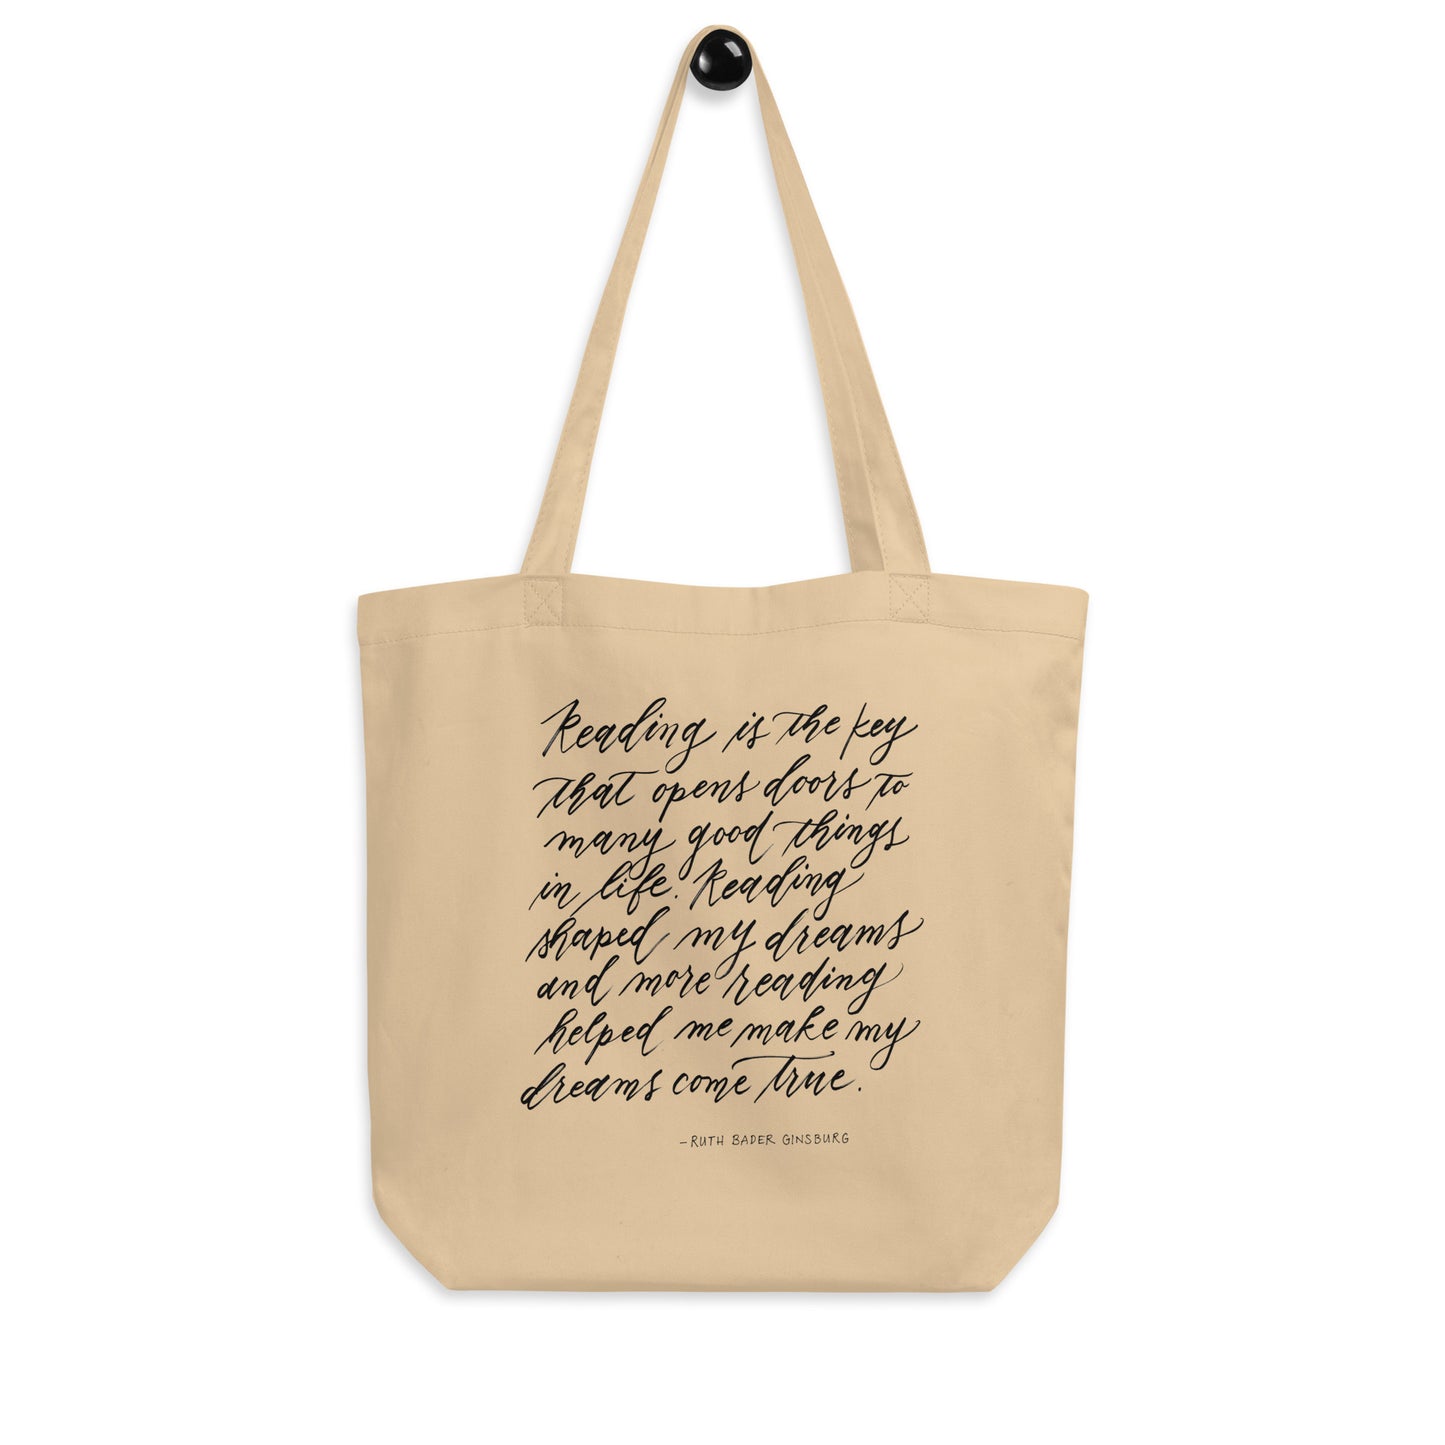 "Reading is Key" Ruth Bader Ginsburg RBG Quote Calligraphy Printed Certified Organic Cotton Canvas Medium Eco Tote Bag